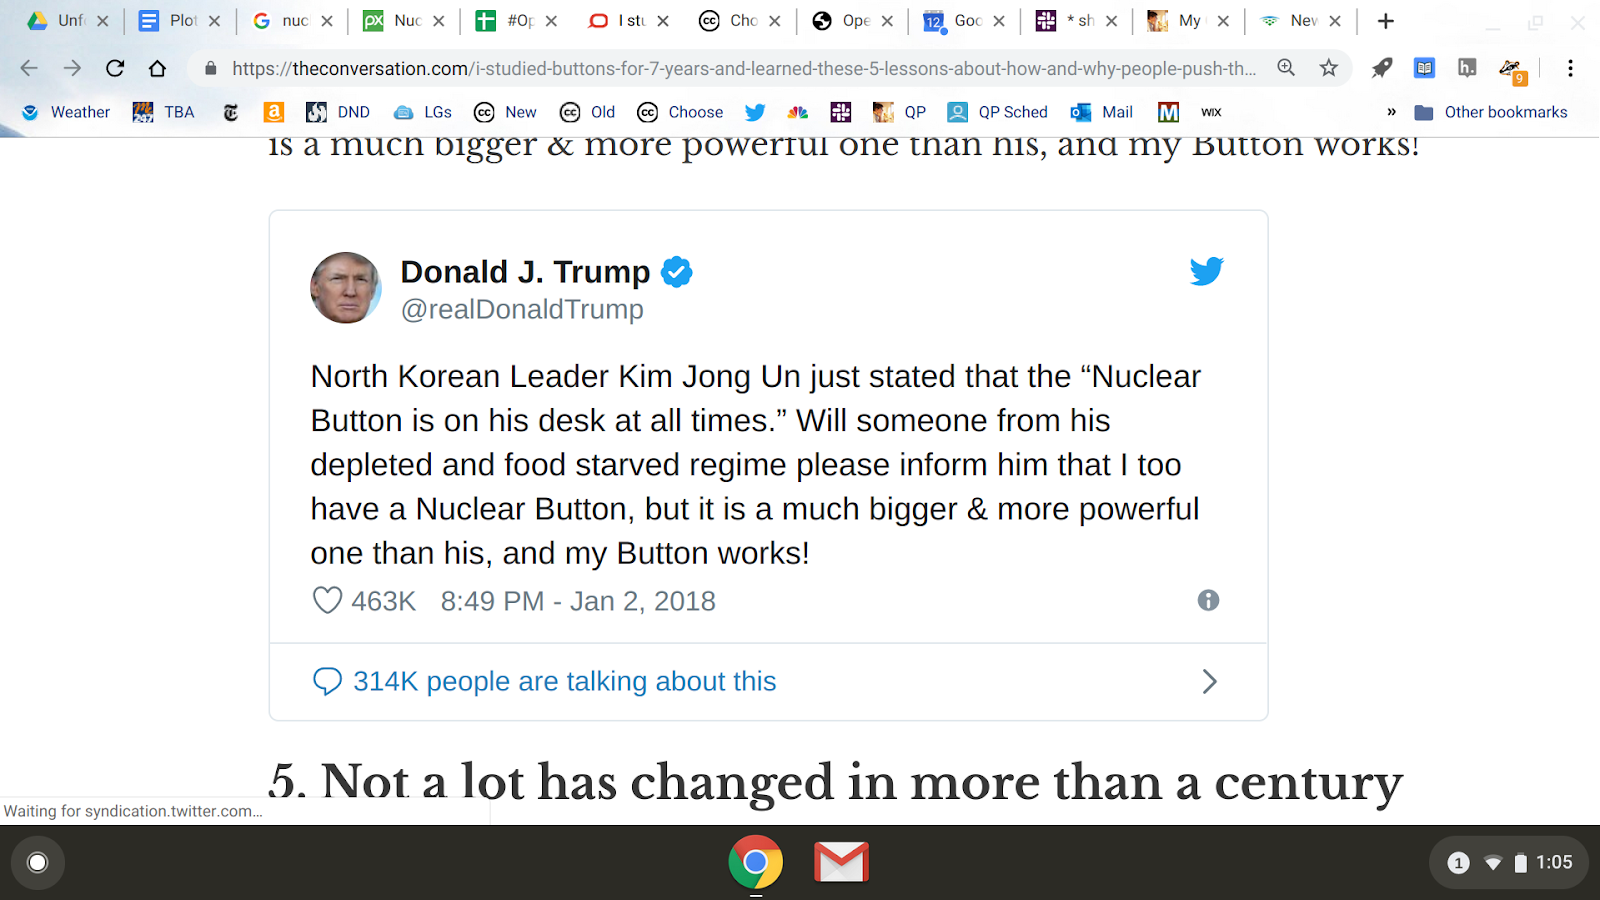 Image of a tweet from Donald J. Trump in 2018 discussion Kim Jong Un comment on Nuclear war.